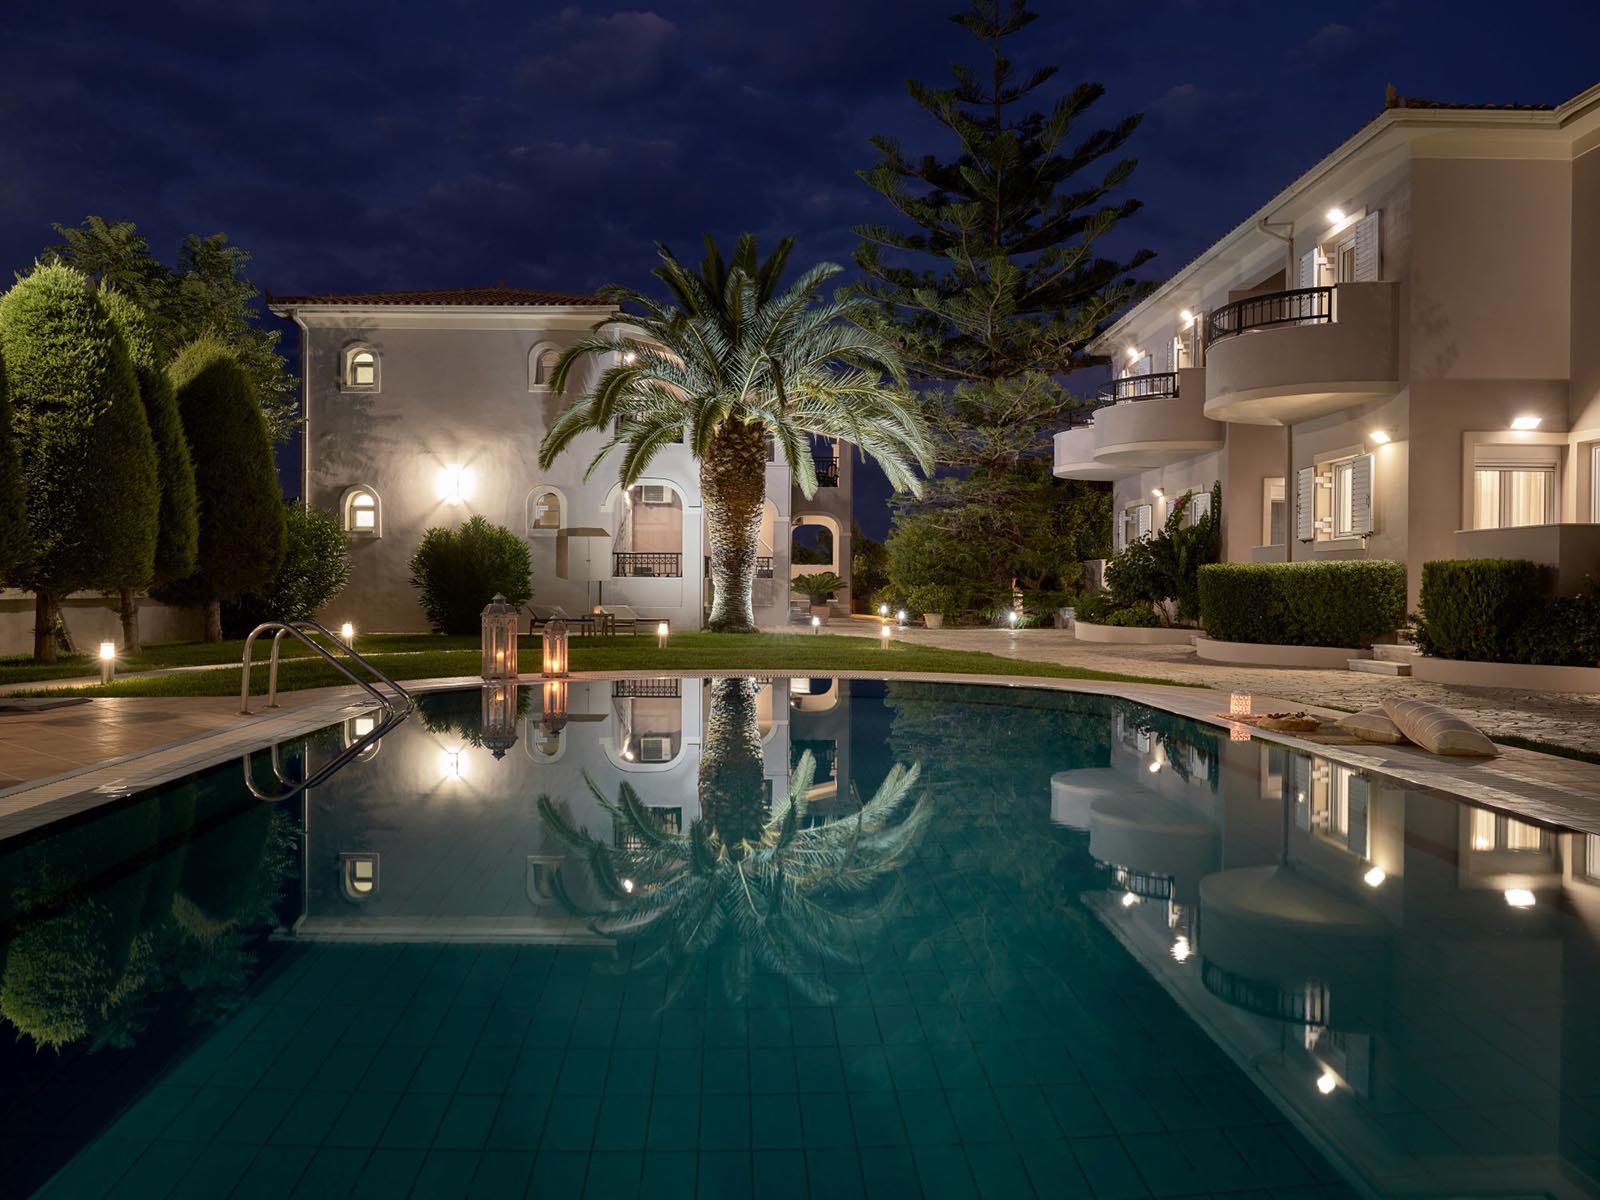 A Variety of services and amenities at San Giorgios Maisonntes in Laganas